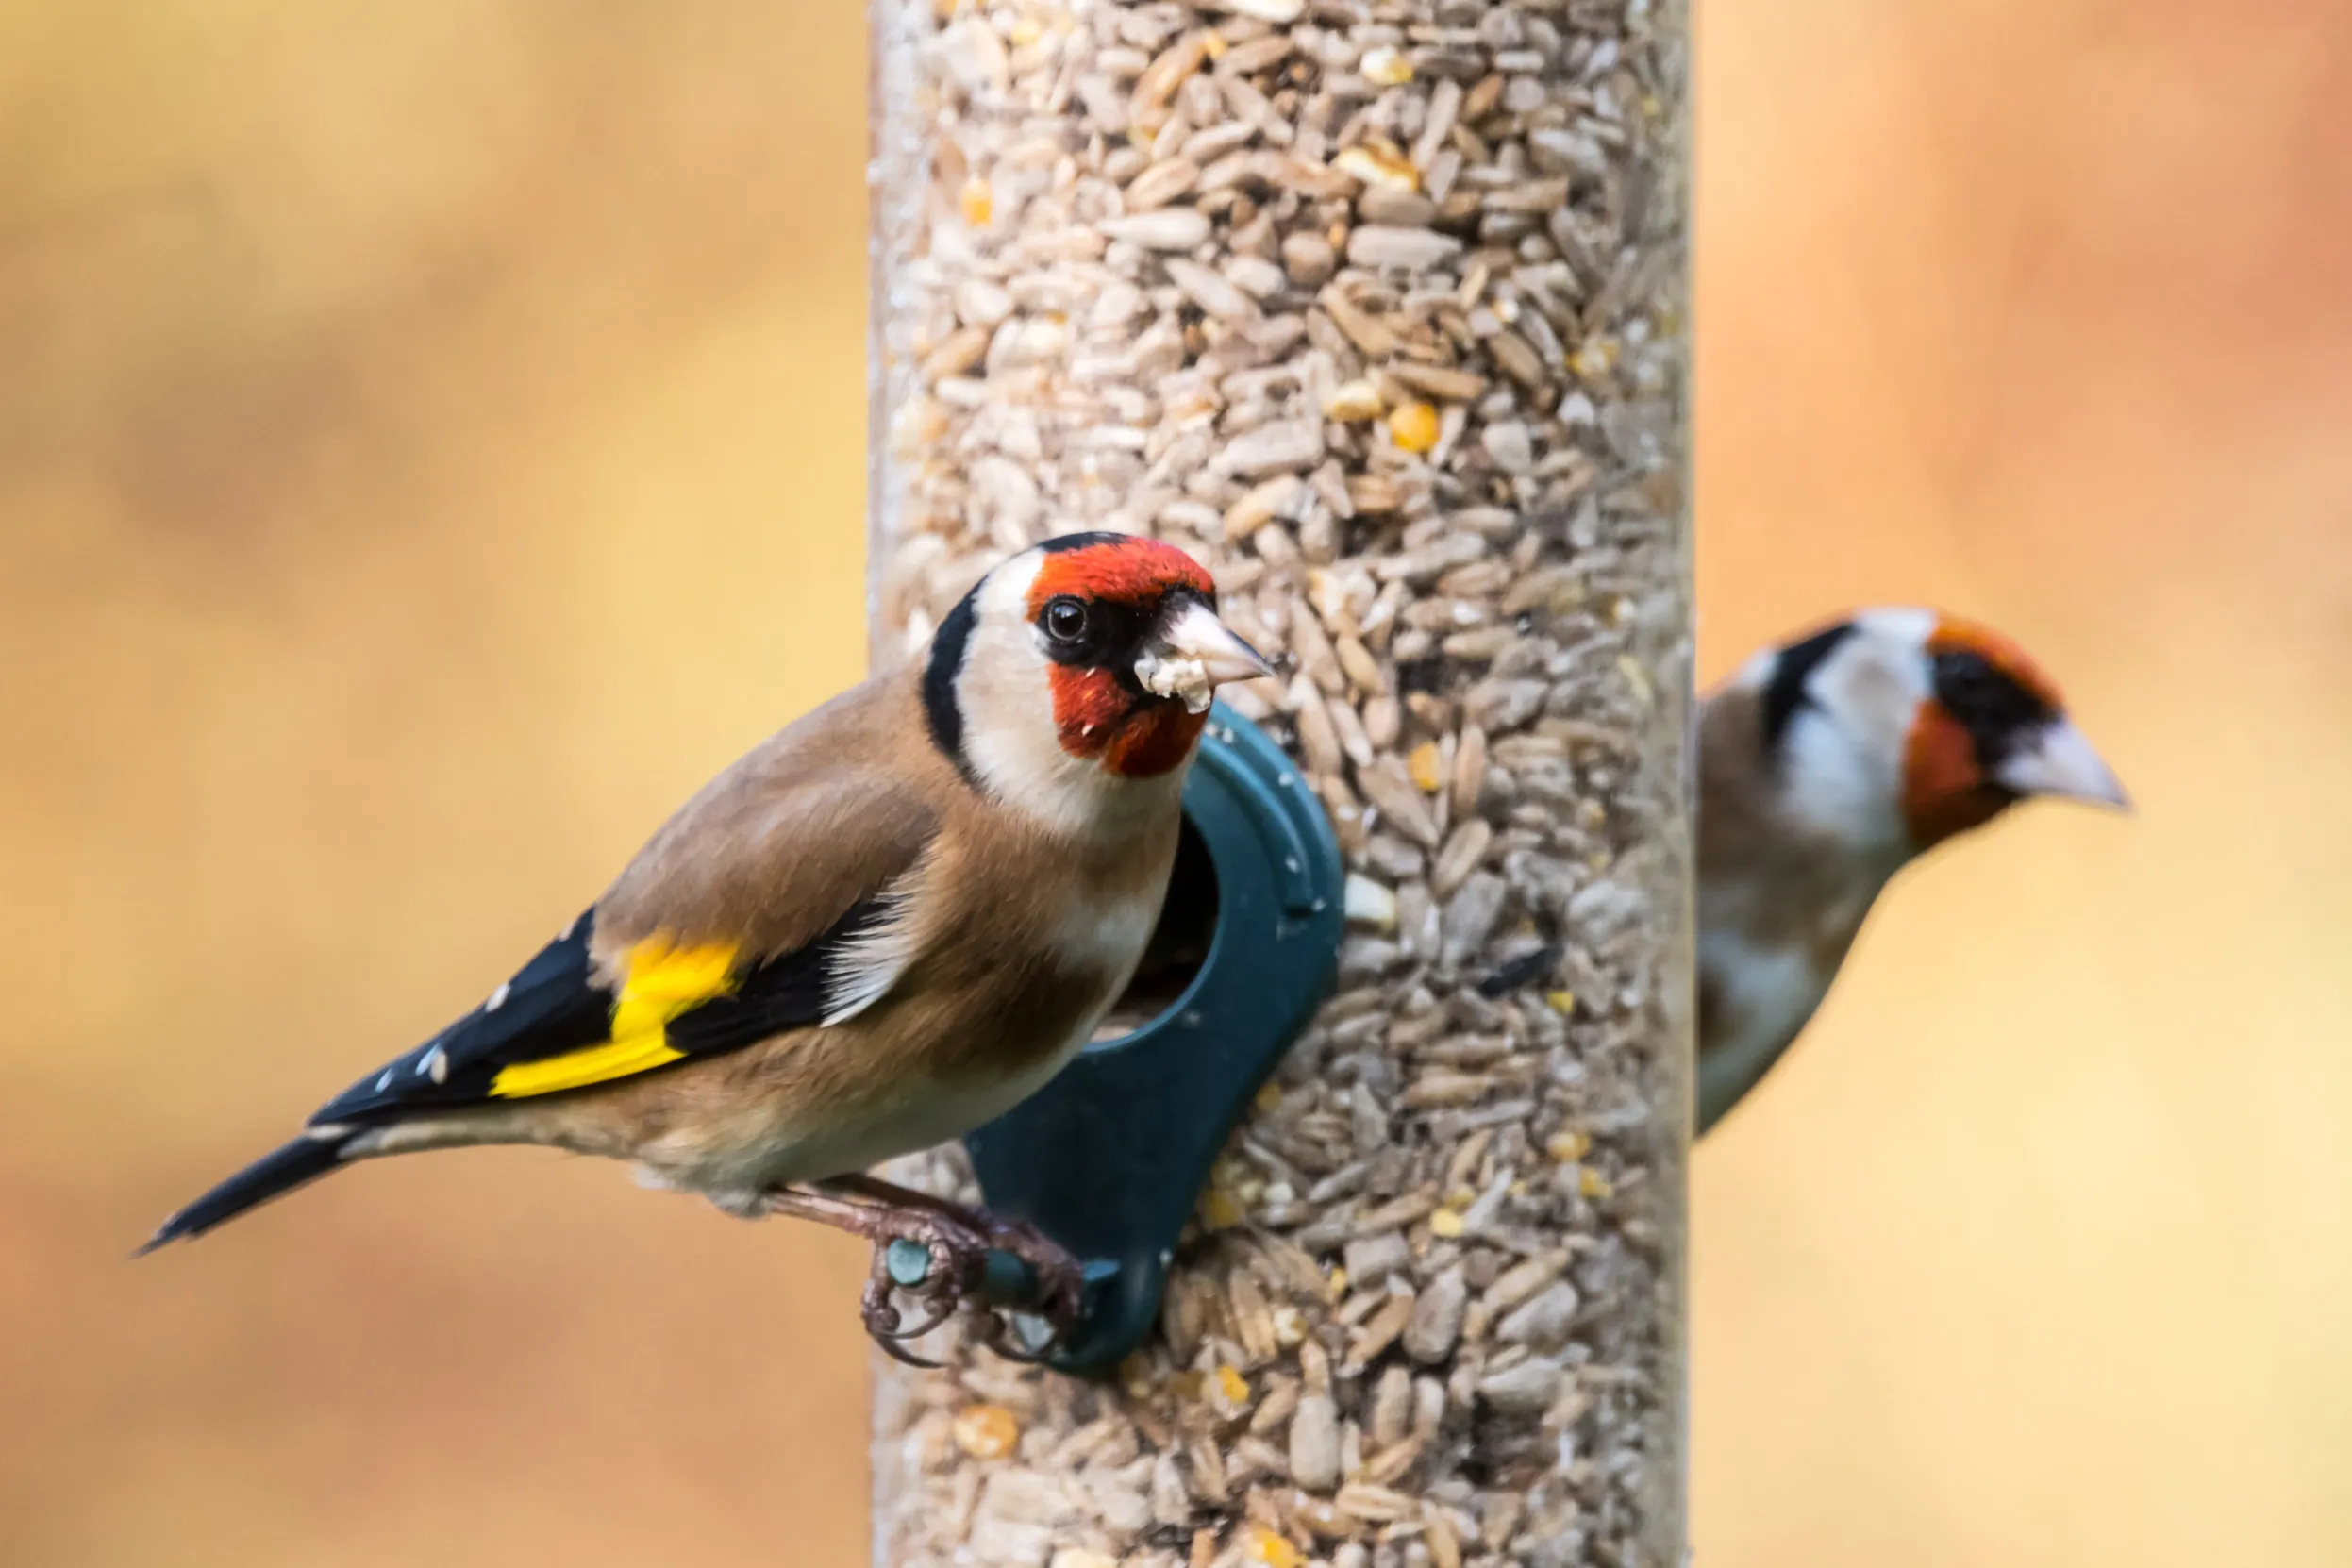 A pair of Goldfinches feeding off of a domestic bird feeder.